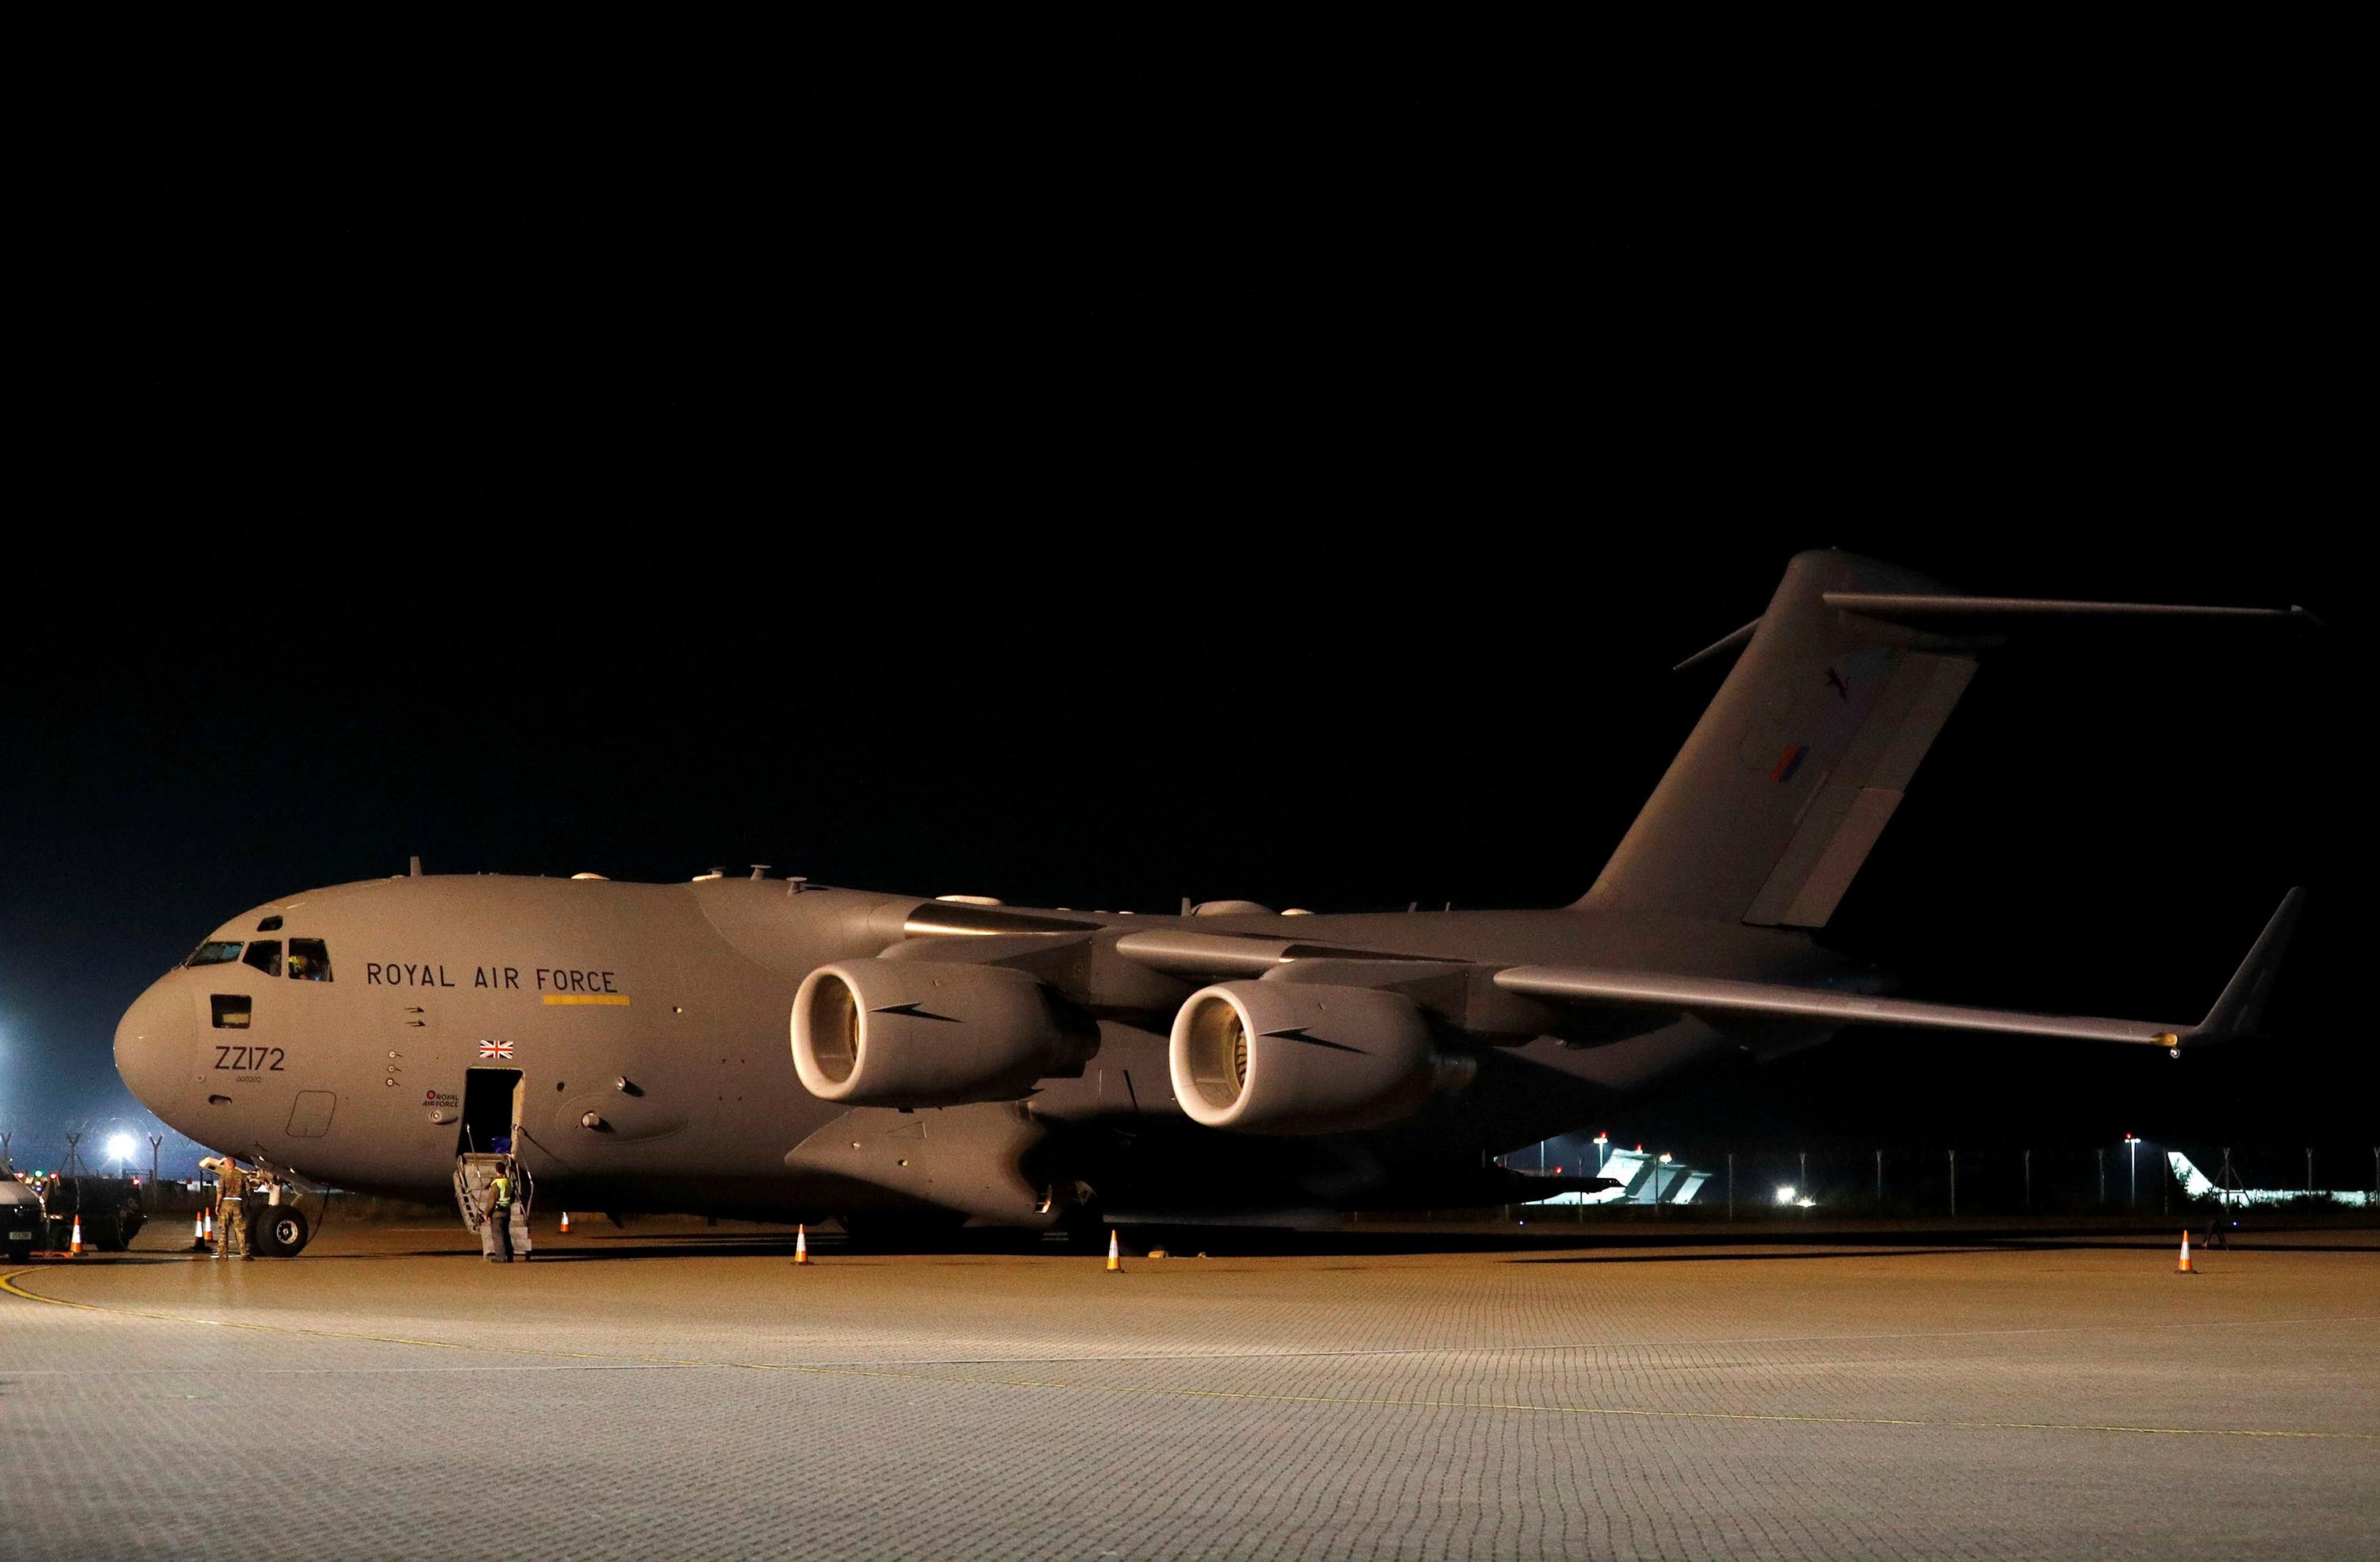 British military personnel depart a C-17 aircraft at Royal Air Force Brize Norton, Oxfordshire, late Sunday, August 29. The final UK troops and diplomatic staff were airlifted from Kabul on Saturday, drawing to a close Britain's 20-year engagement in Afghanistan and a two-week operation to rescue UK nationals and Afghan allies.